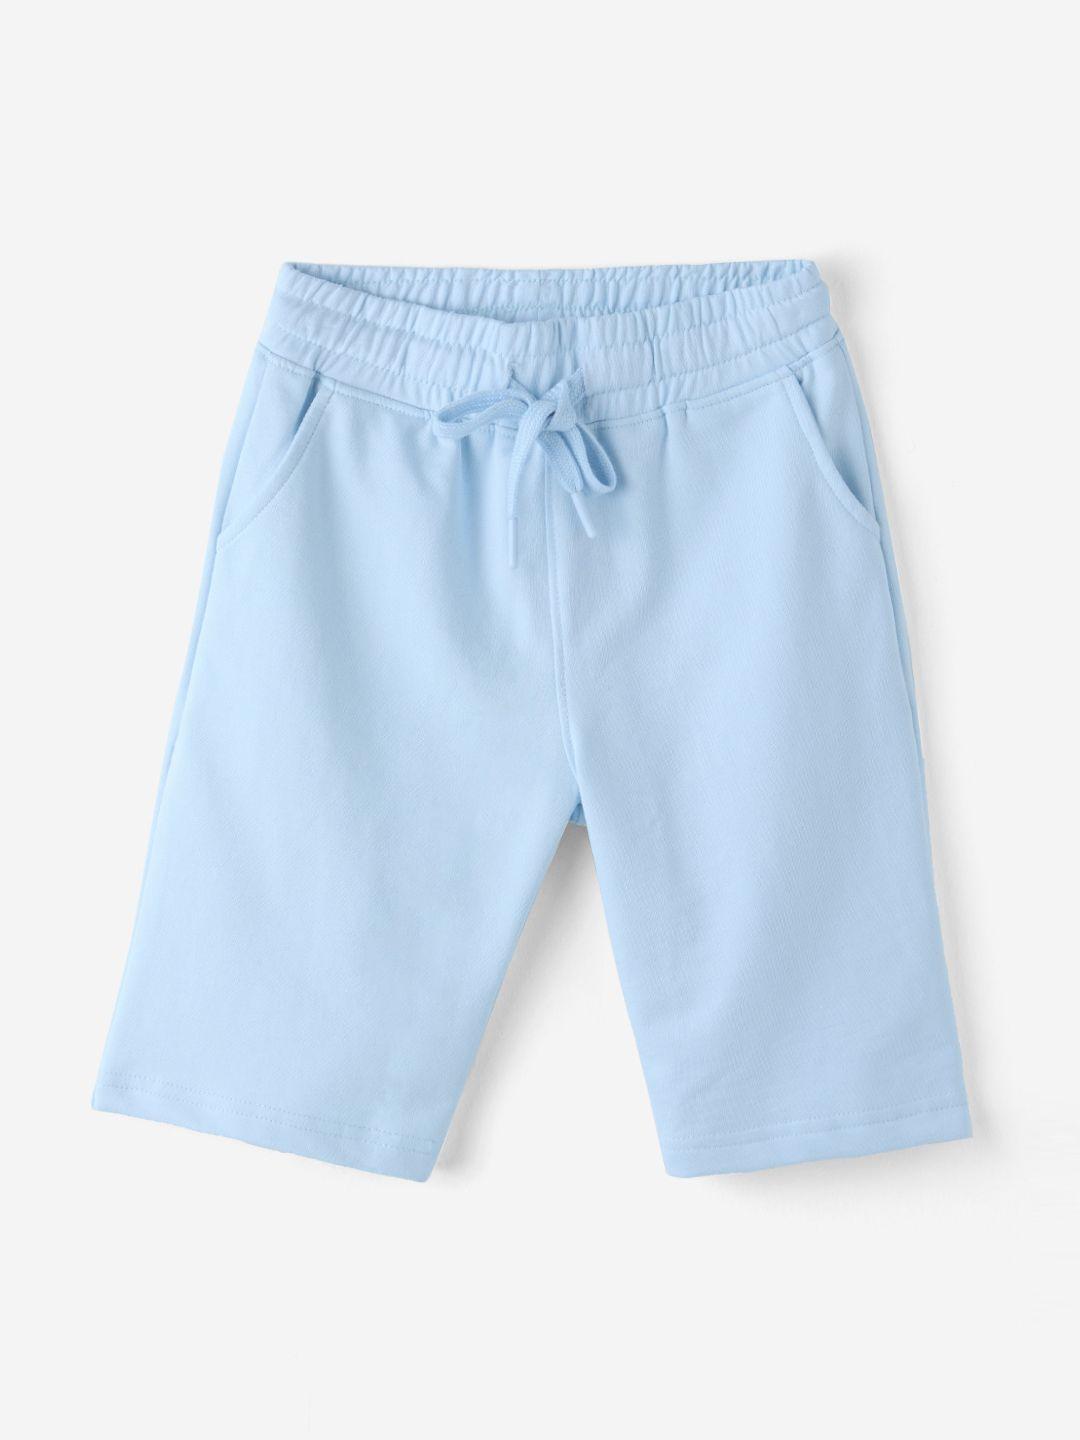 the souled store boys mid-rise casual pure cotton shorts